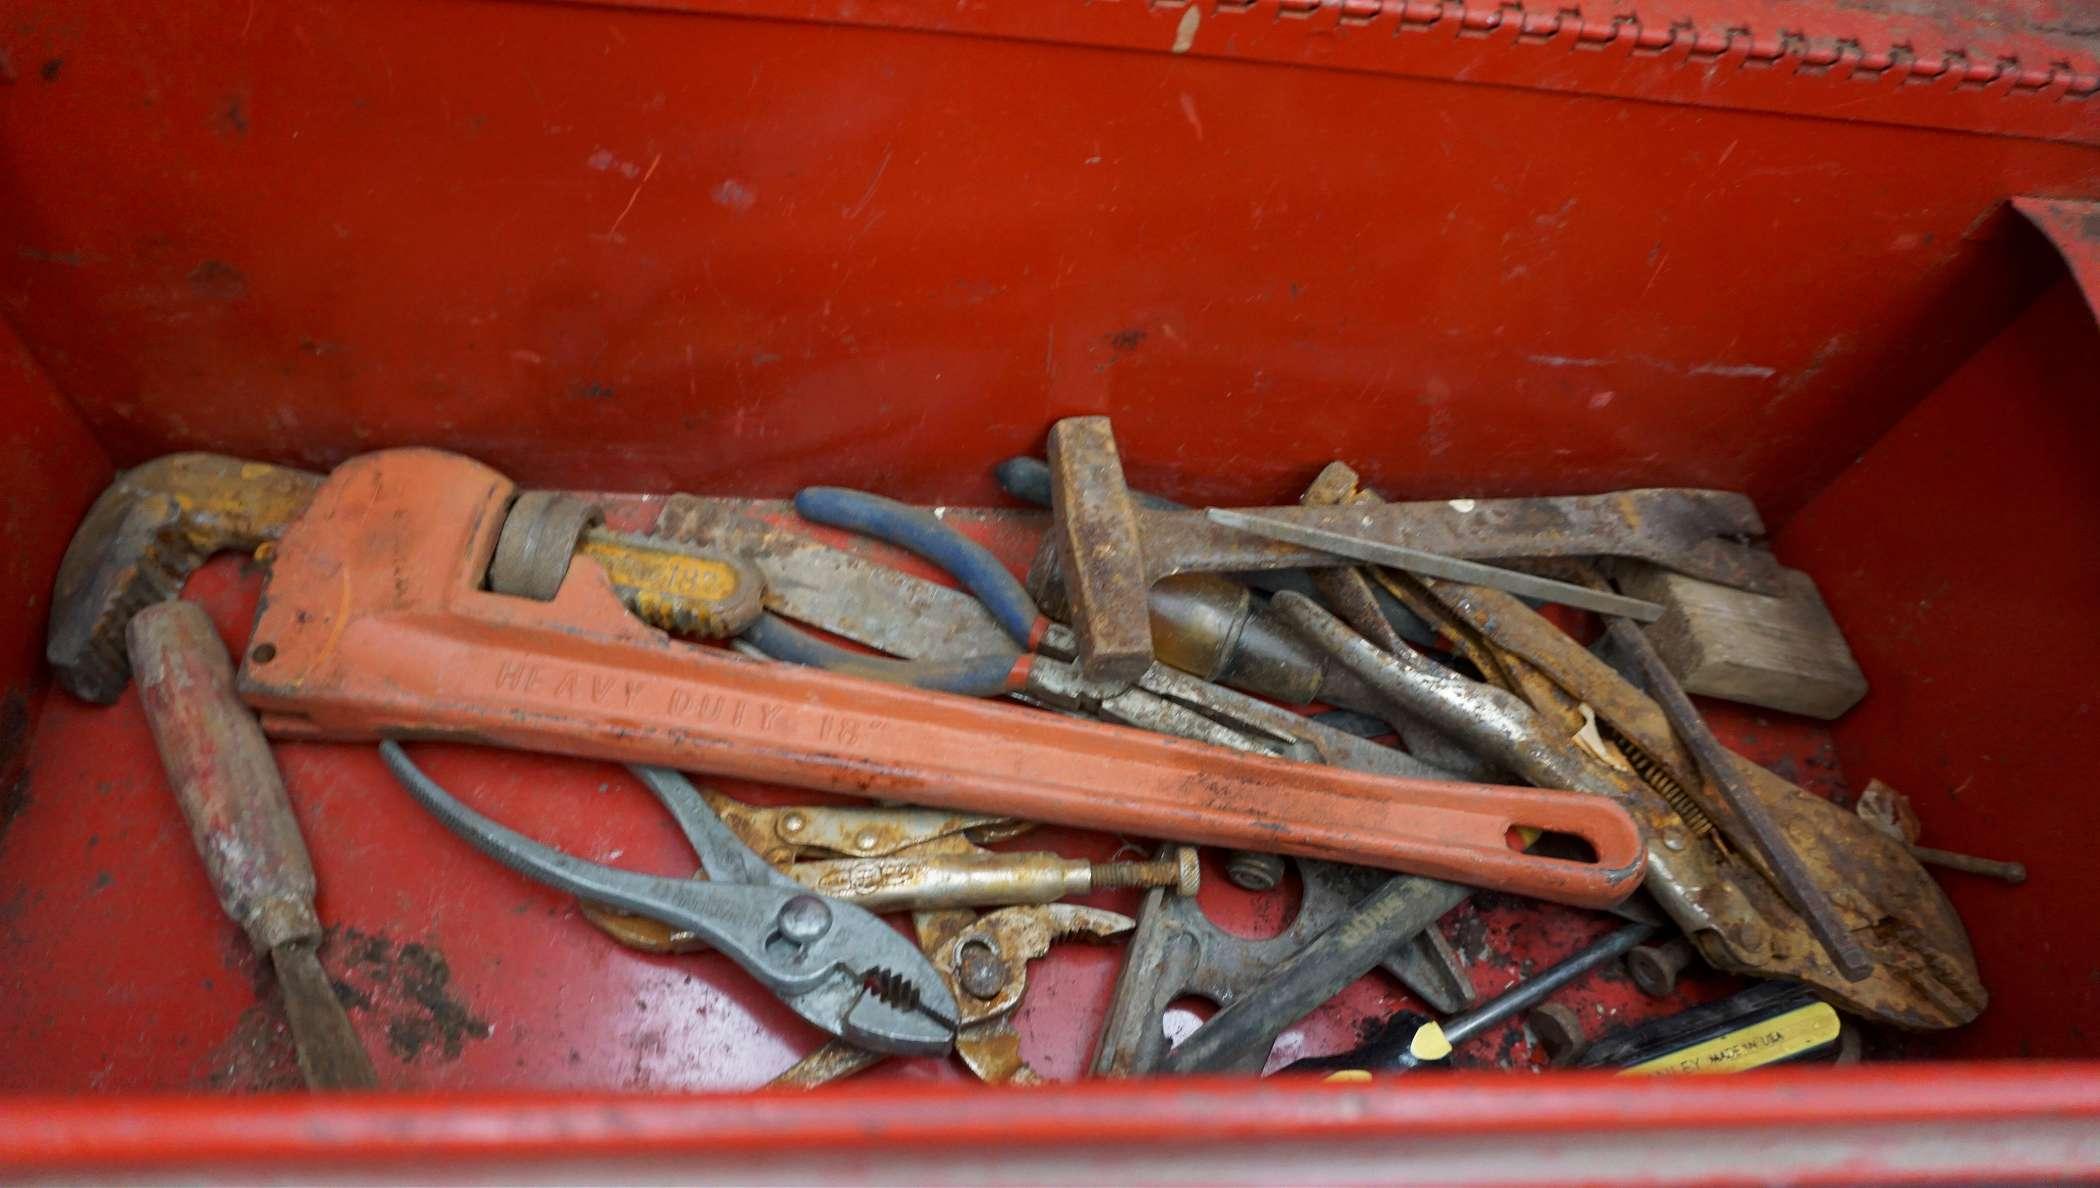 Waterloo Red Metal Toolbox w/ Pipe Wrench, Pliers, Punches & More